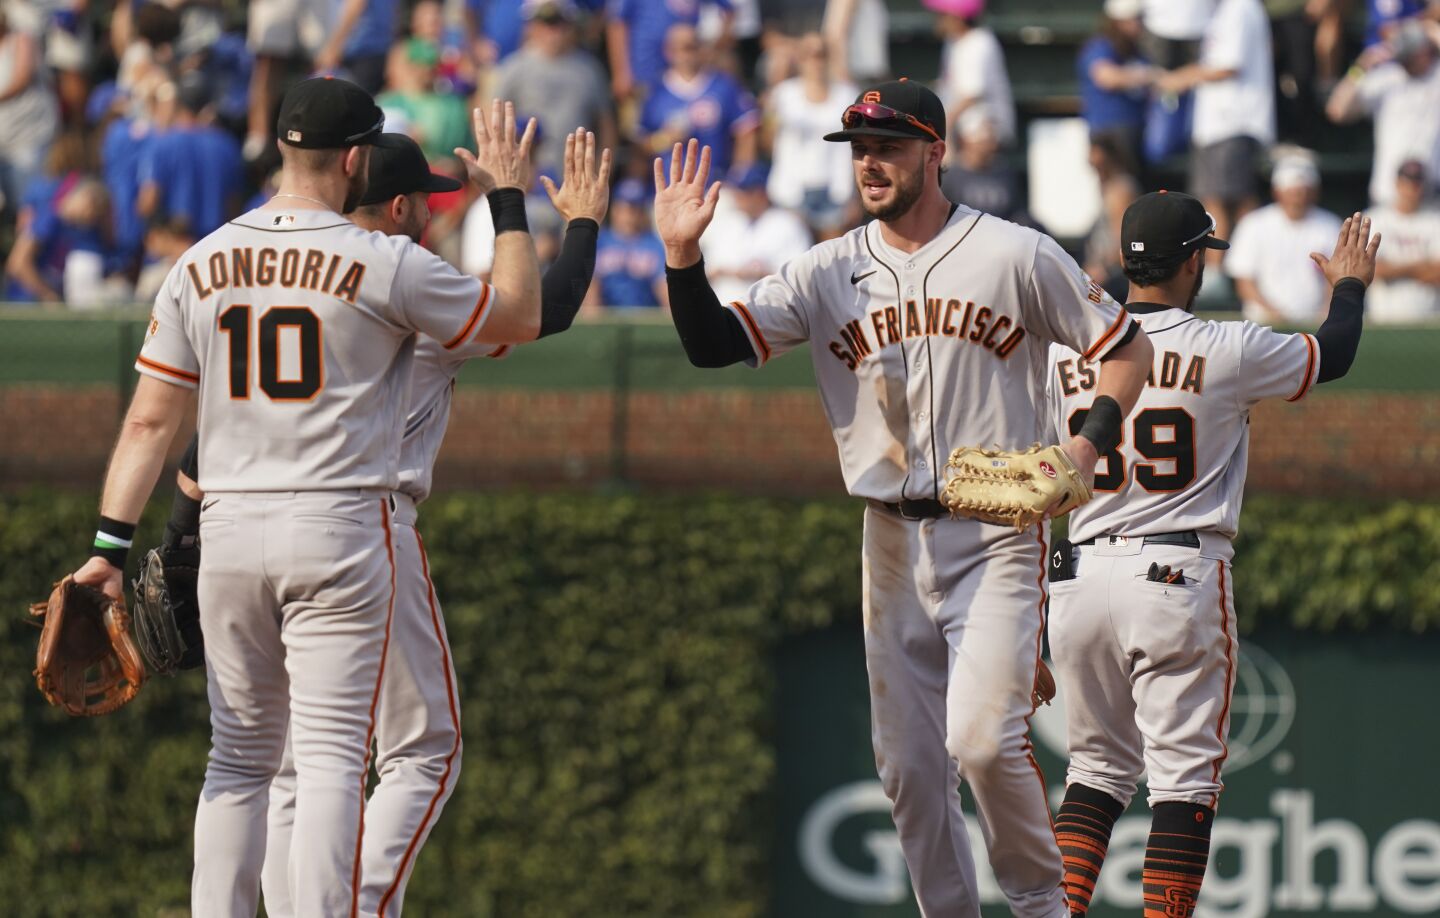 1 | San Francisco Giants (93-50; Last week: 1)How good are the Giants? They are two wins away from surpassing their best win total from their run of three World Series in five years and there’s three weeks left to the season.